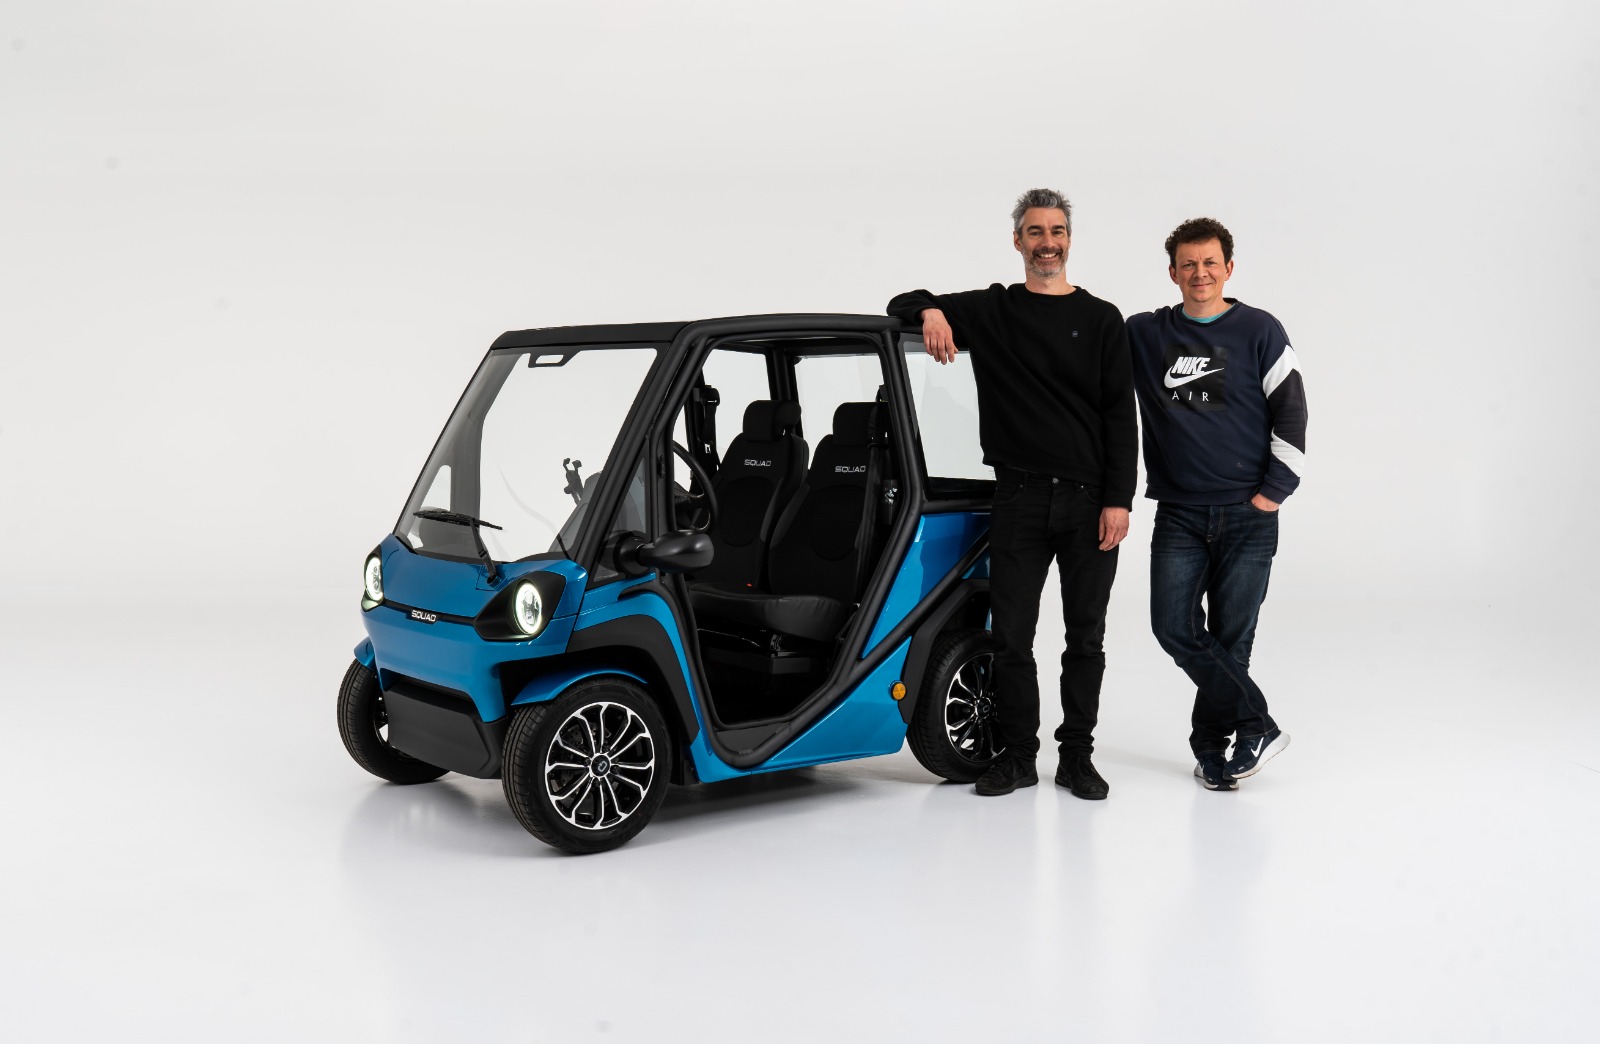 Squad Mobility, the world’s first Solar City Car for sharing and private use. The ultimate smart urban mobility solution for emissions, congestion and parking.